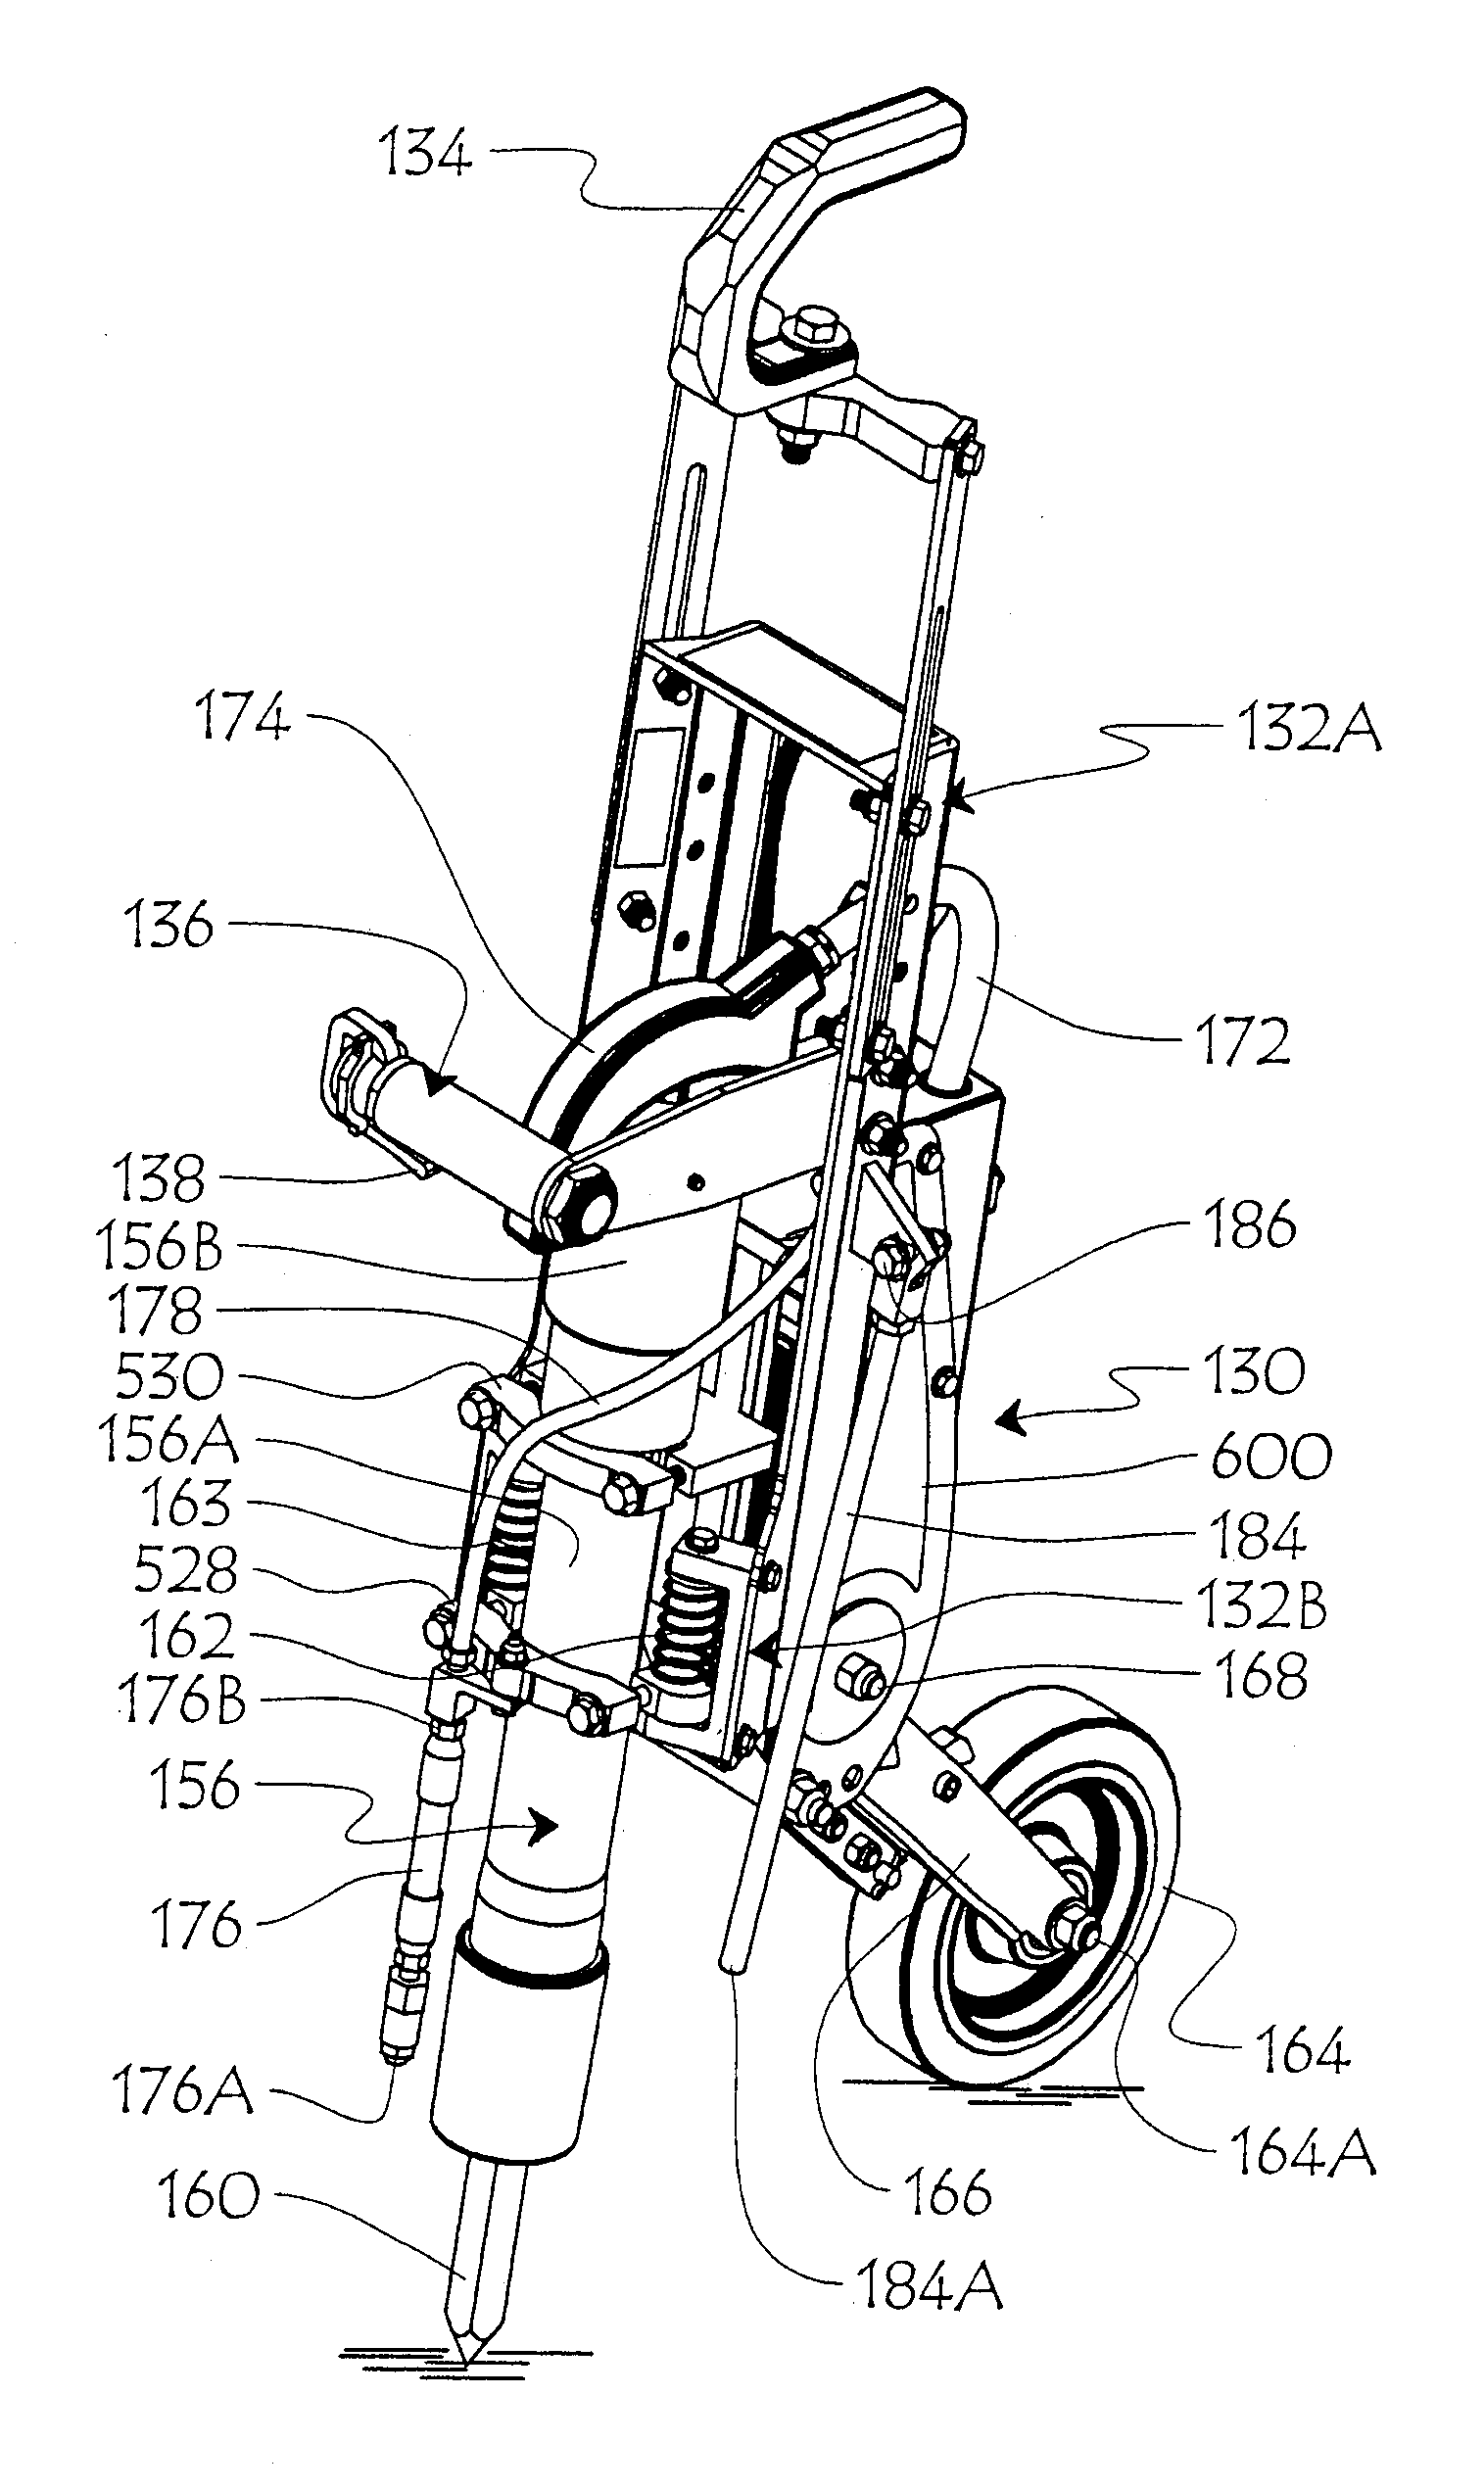 Hand-held ergonomic jackhammer holder for concrete floor chipping, jackhammer and holder assembly, and method of use thereof